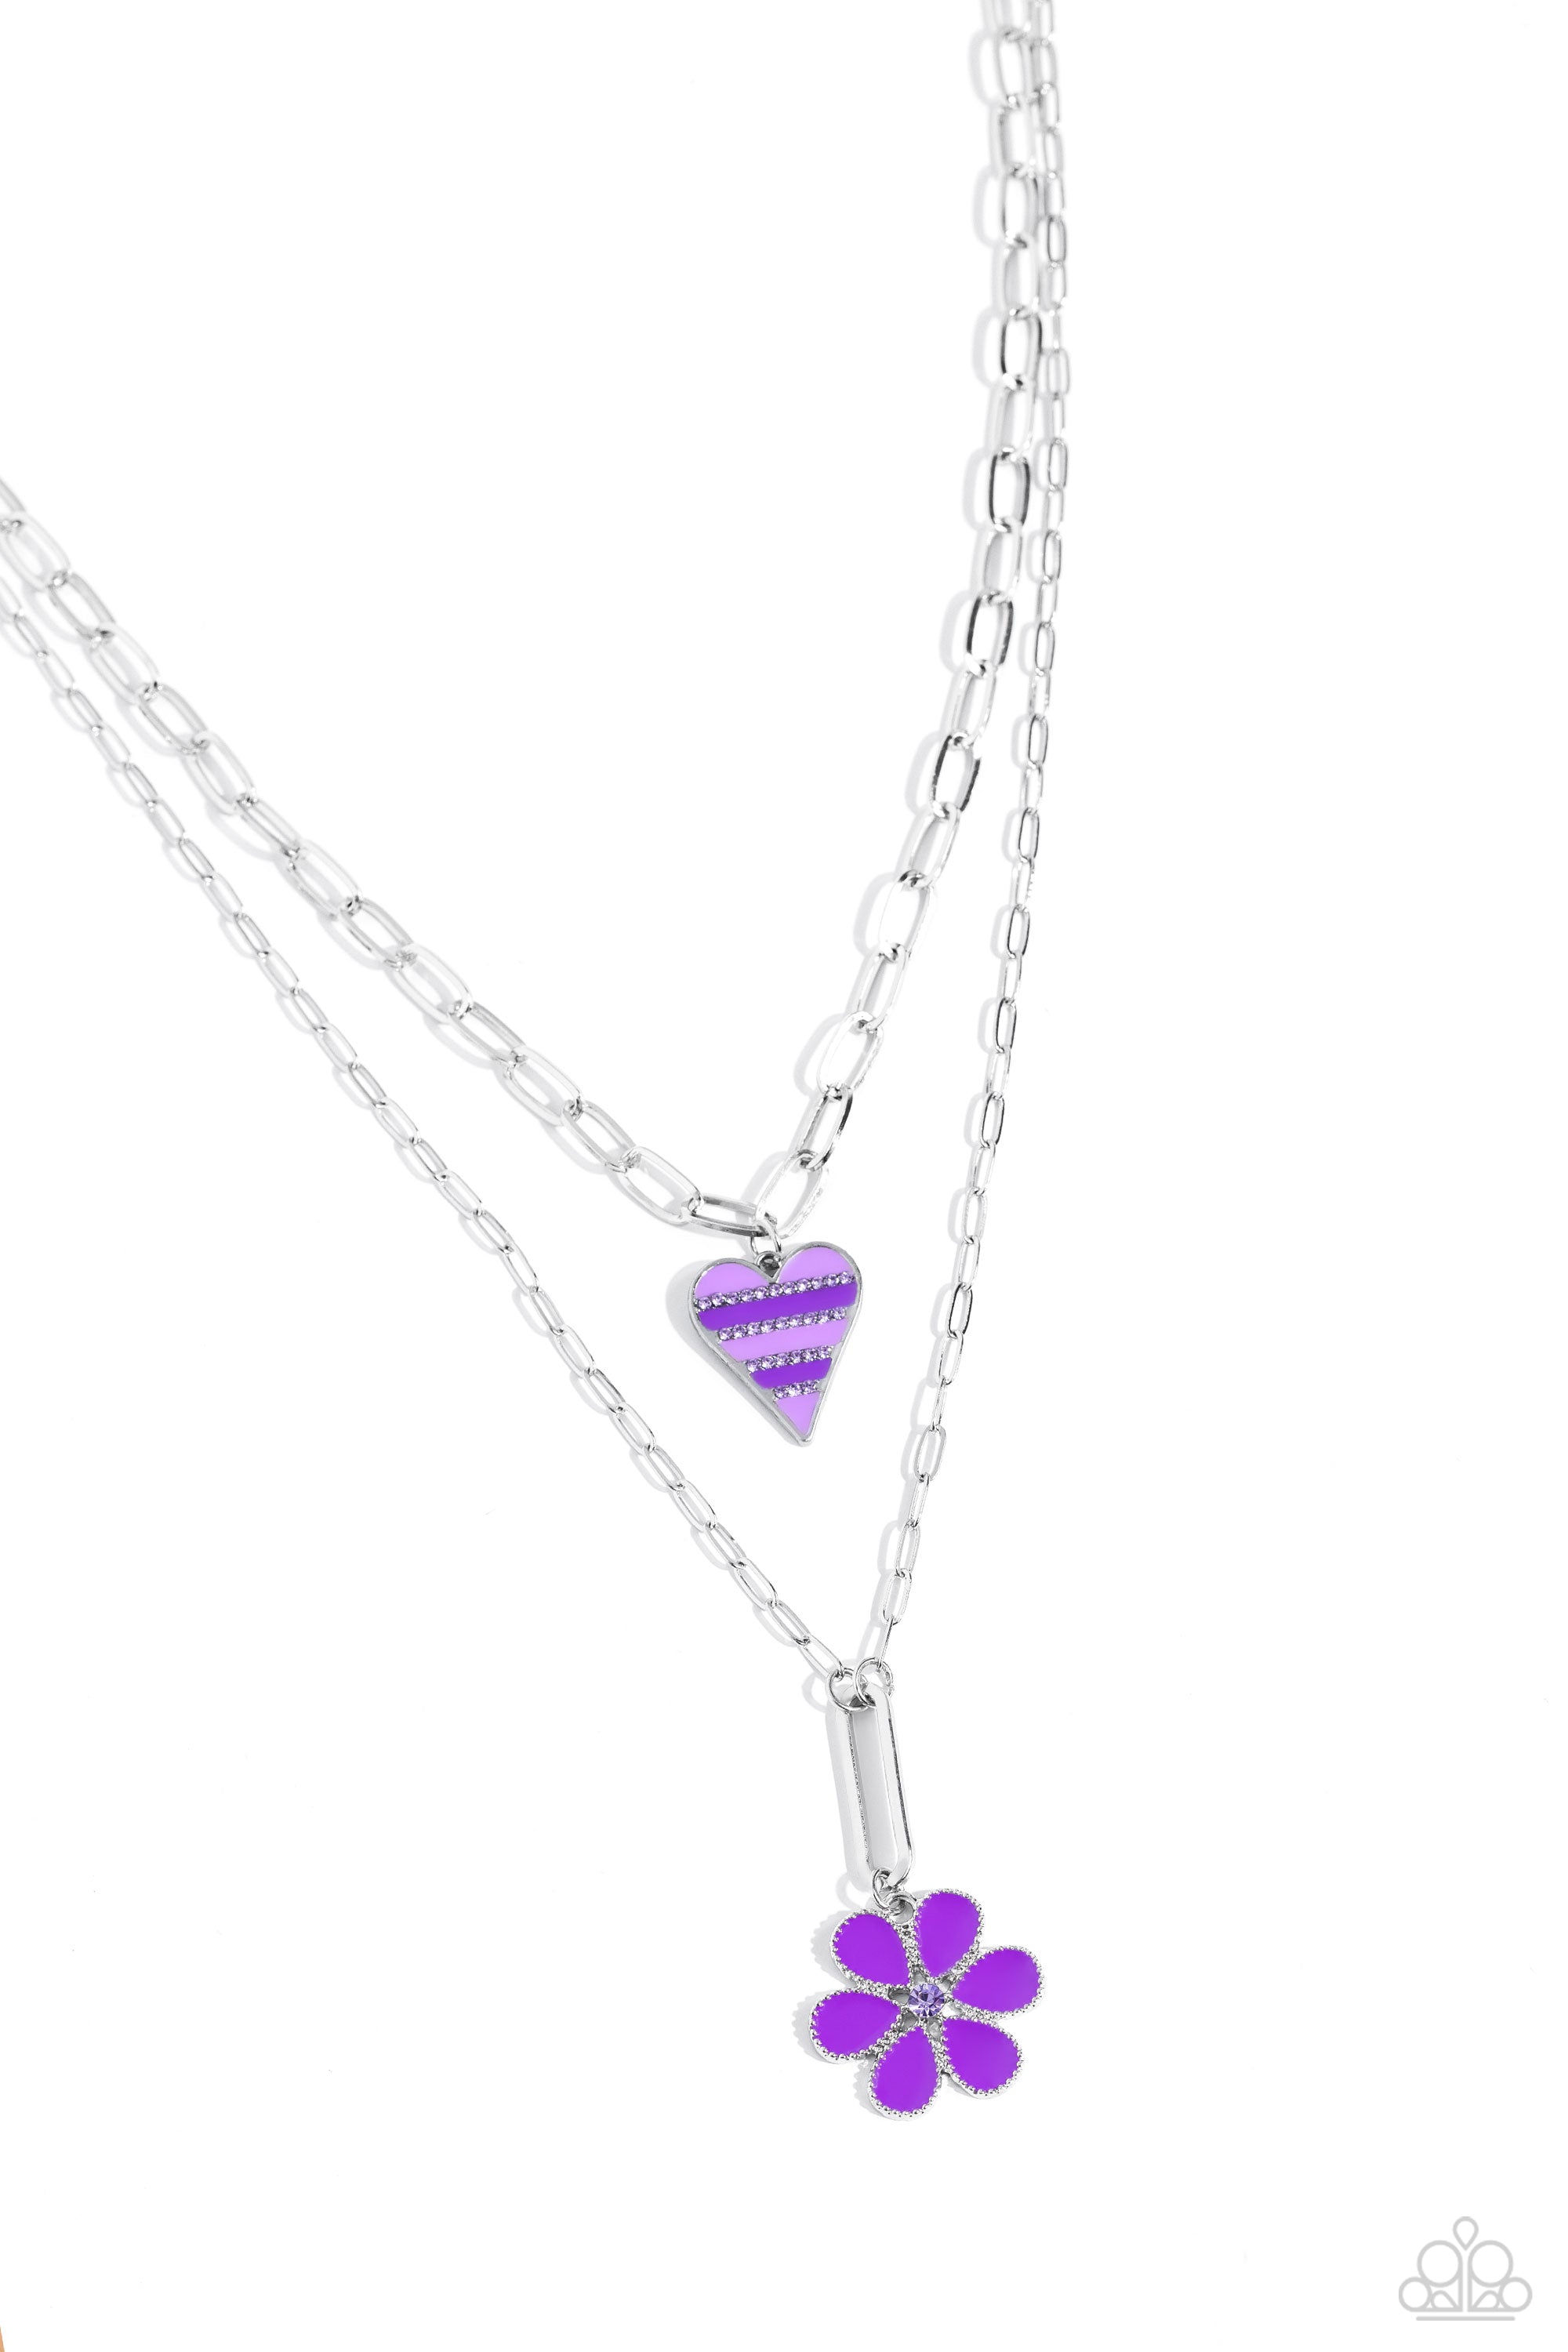 Childhood Charms Purple Heart & Flower Necklace - Paparazzi Accessories- lightbox - CarasShop.com - $5 Jewelry by Cara Jewels